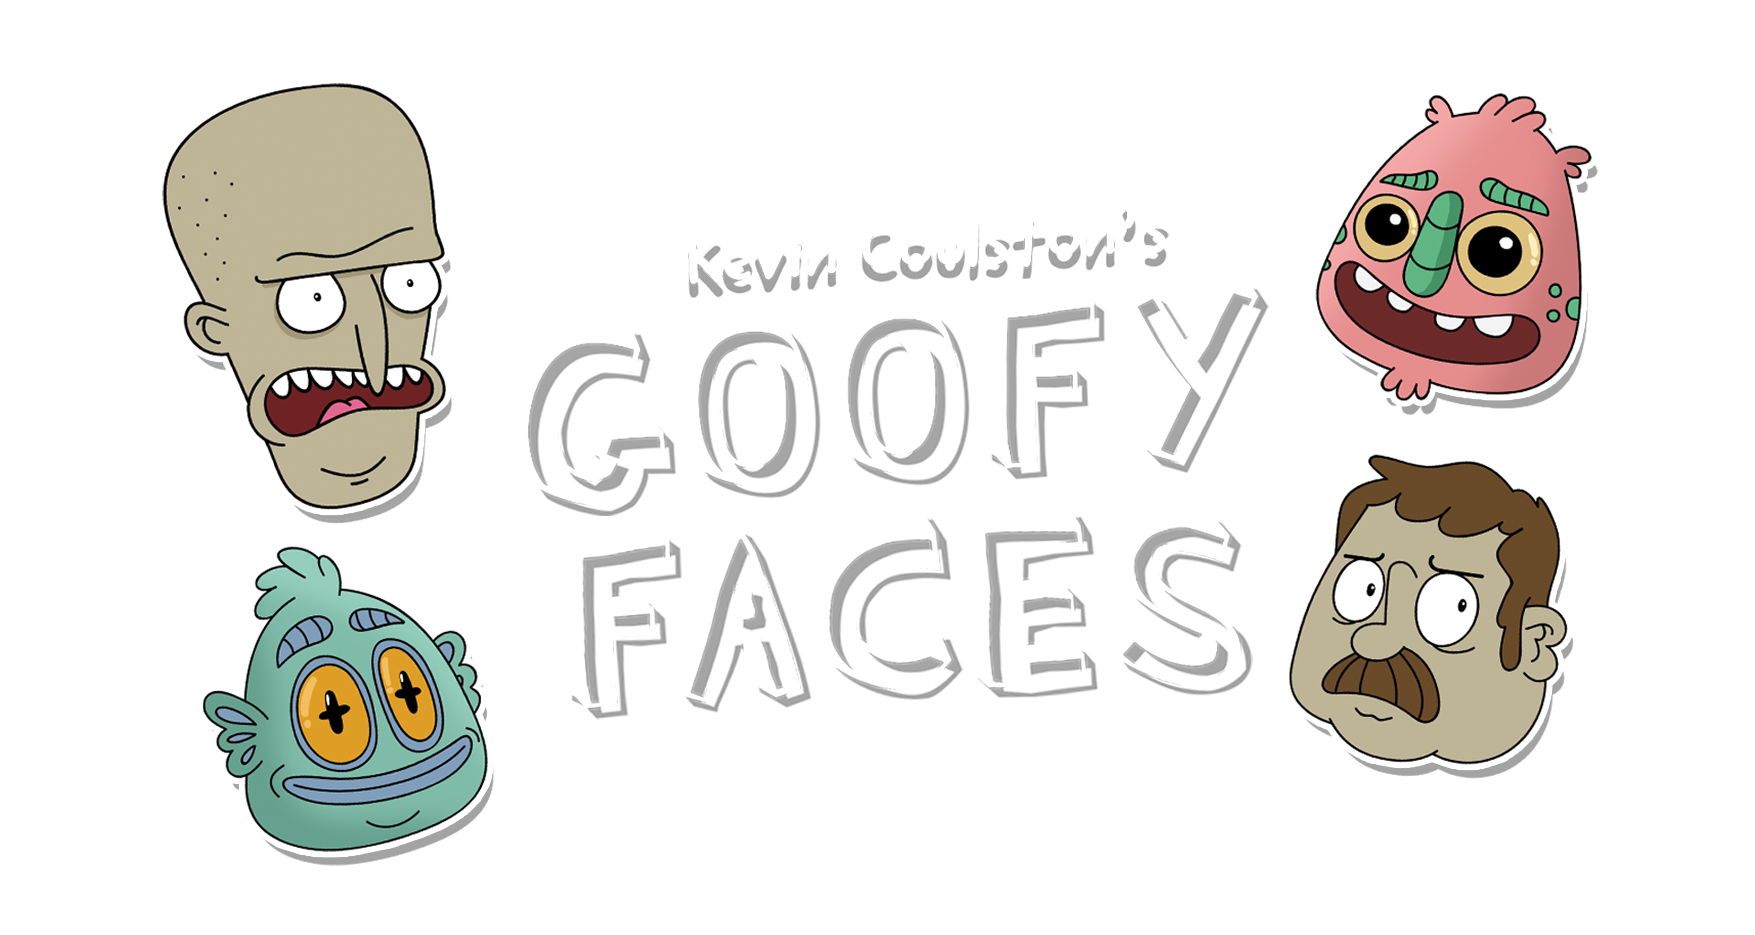 Kevin Coulston's Goofy Faces Logo